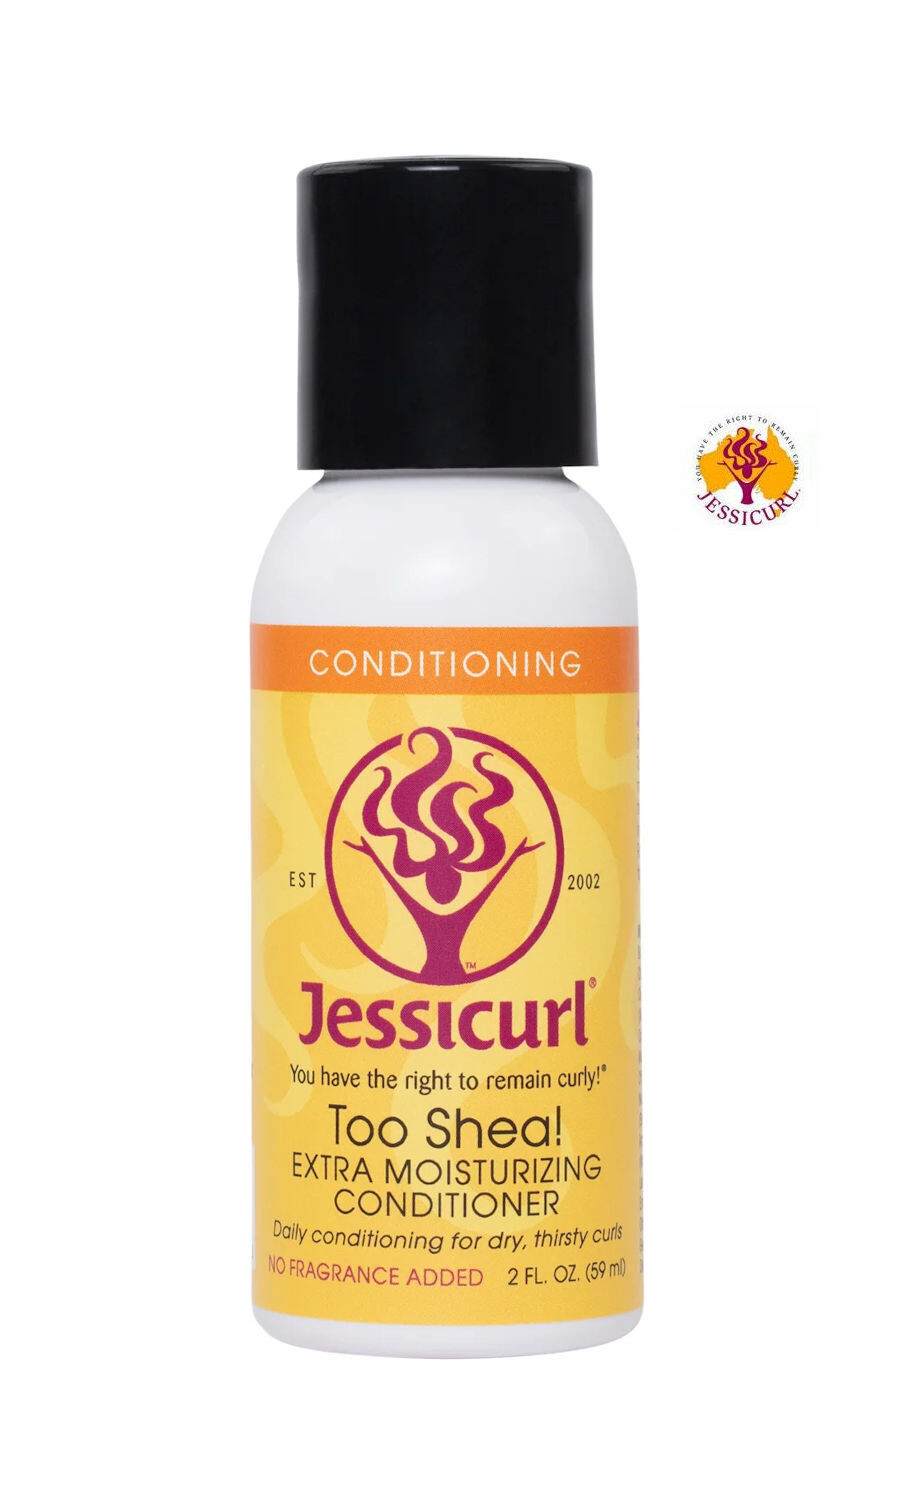 Jessicurl Too Shea! Extra Moisturising Conditioner 59ml No Fragrance Added